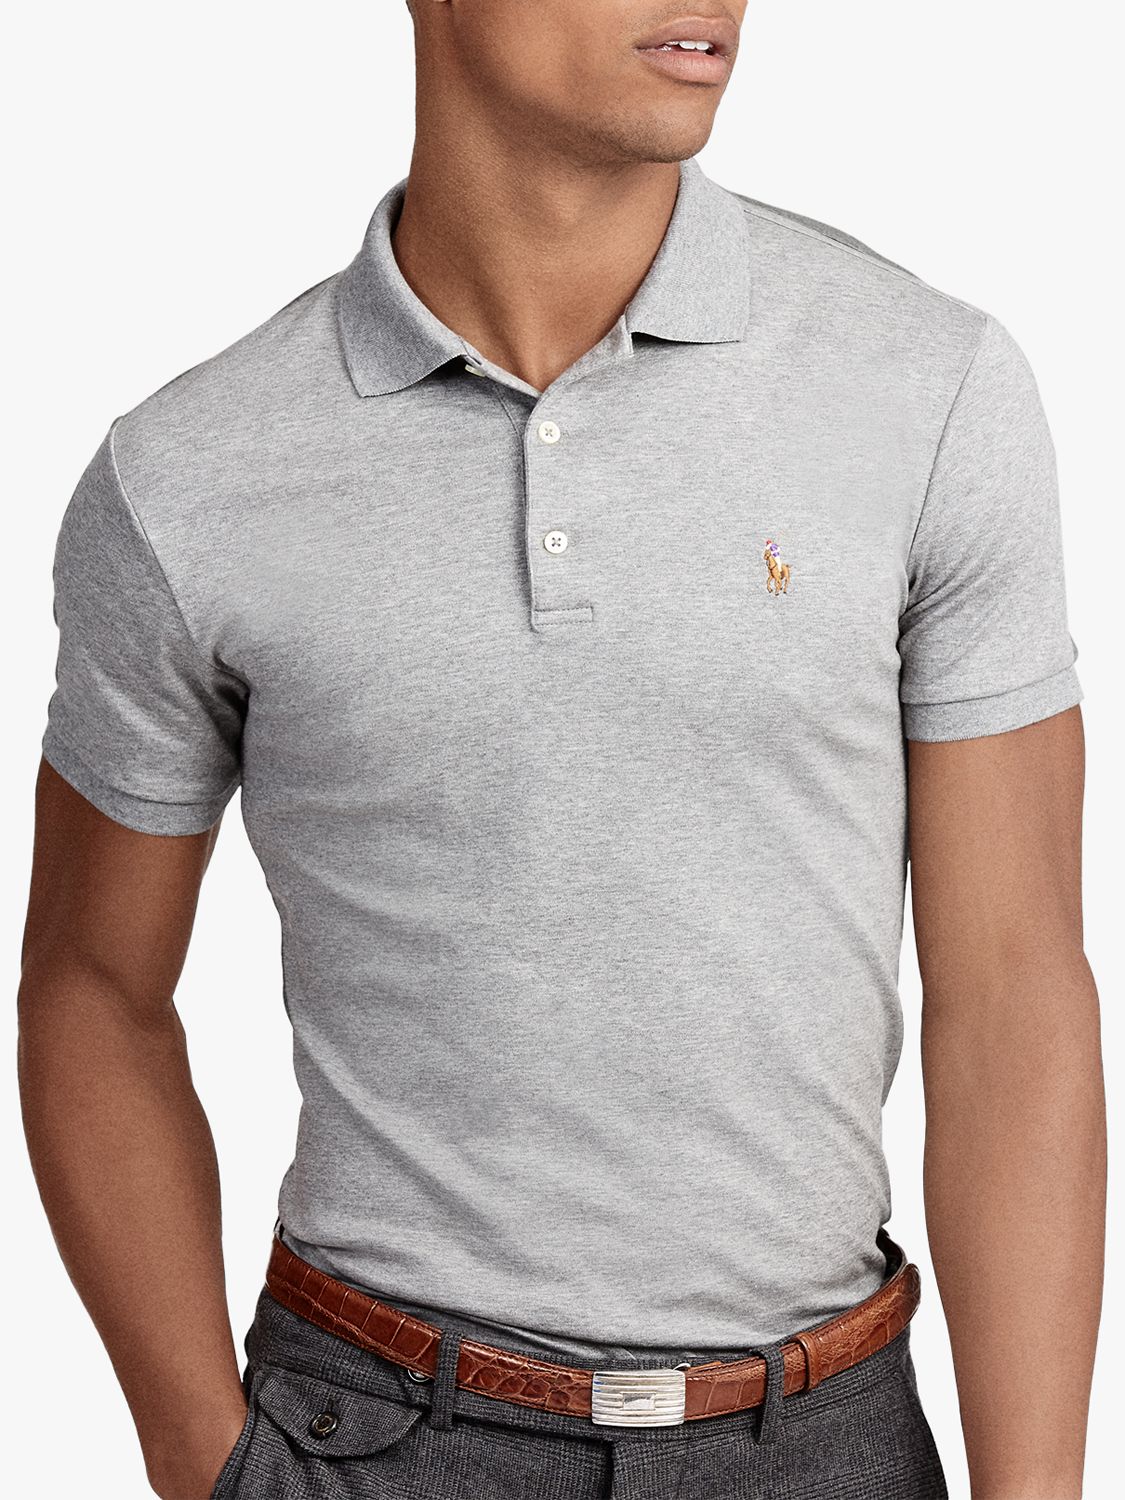 Polo Ralph Lauren Slim Fit Soft Touch Polo Shirt, Grey Heather at John  Lewis & Partners